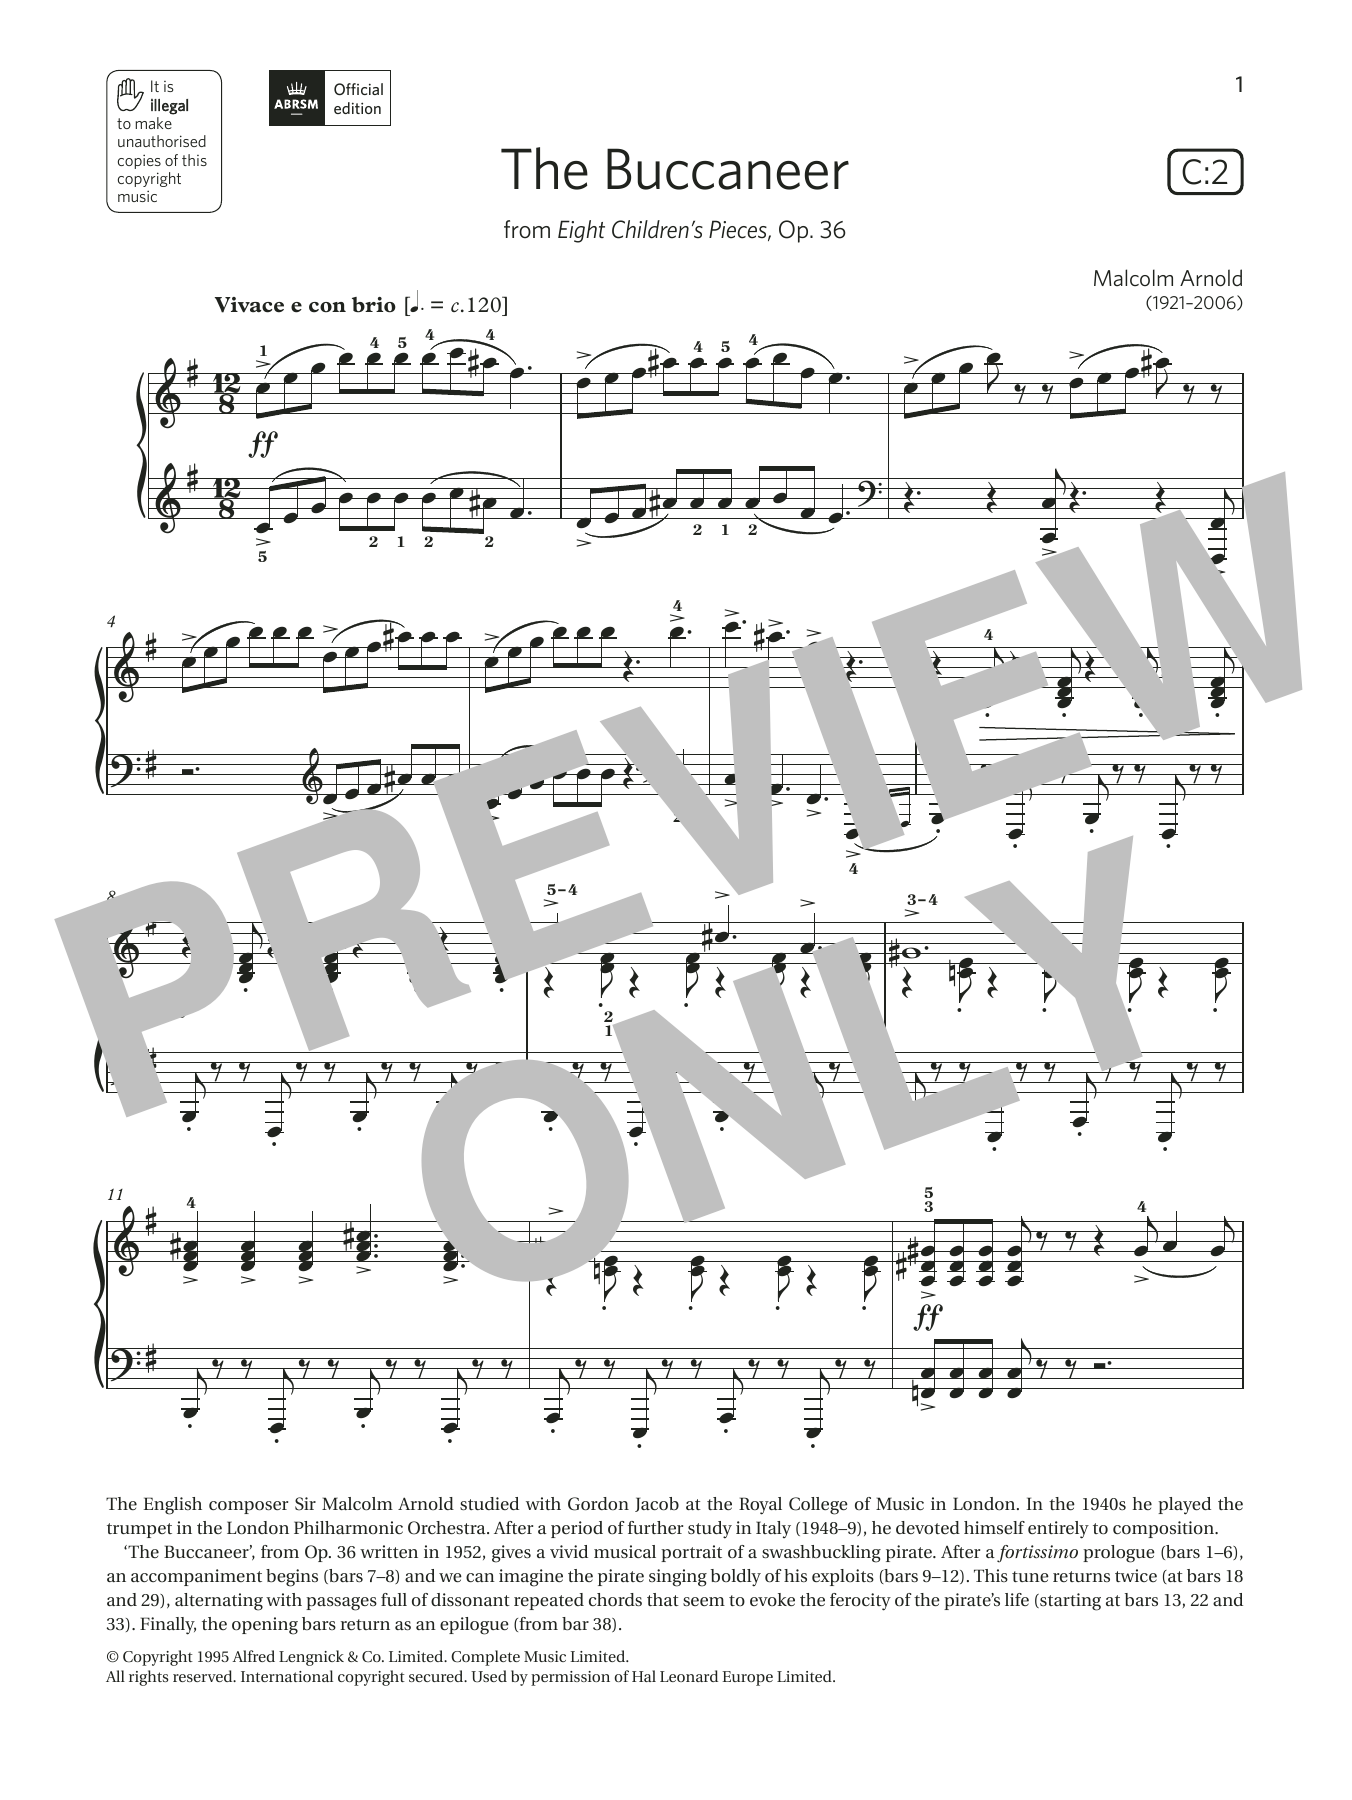 Download Malcolm Arnold The Buccaneer (Grade 6, list C2, from t Sheet Music